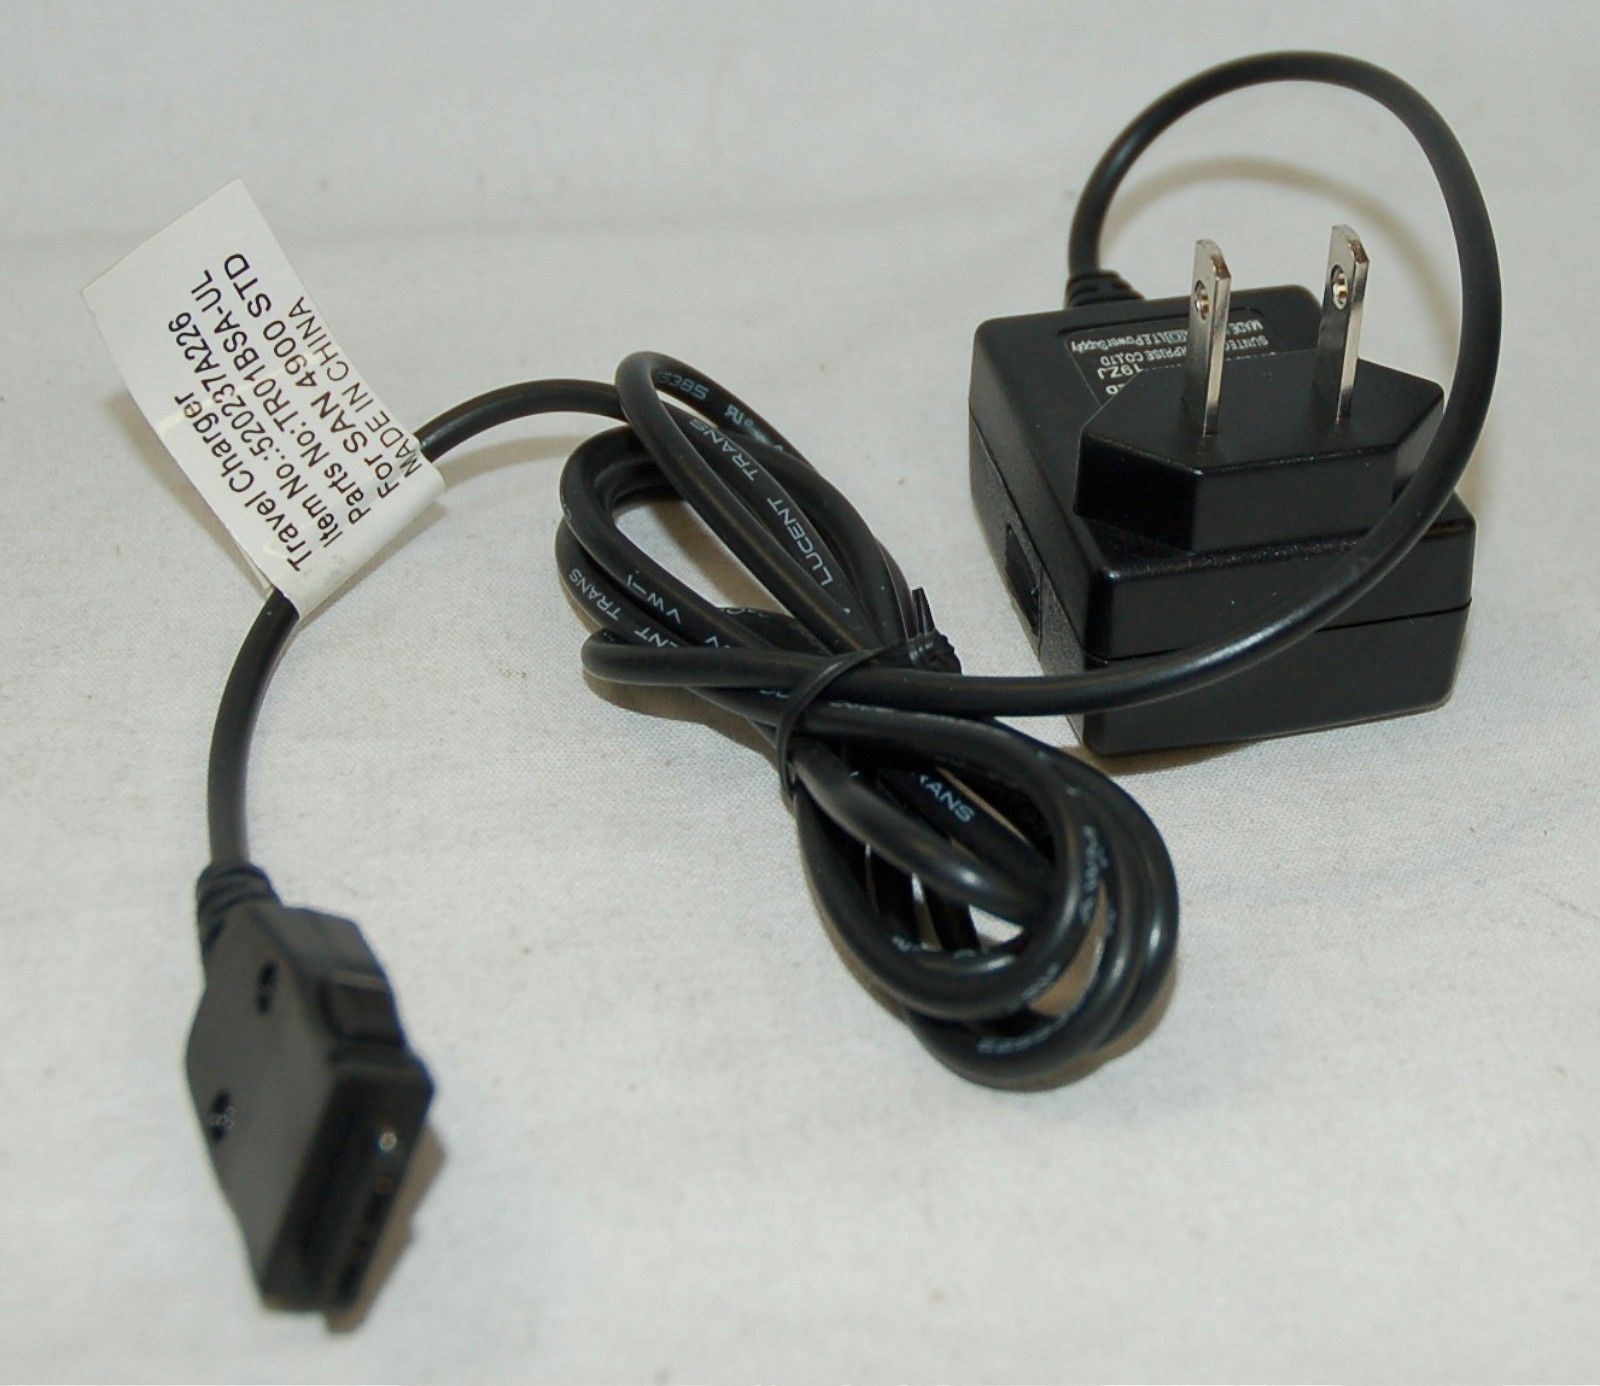 Sanyo MM-8300 PM8200 AC Adapter Power Supply Cord Cable Charger